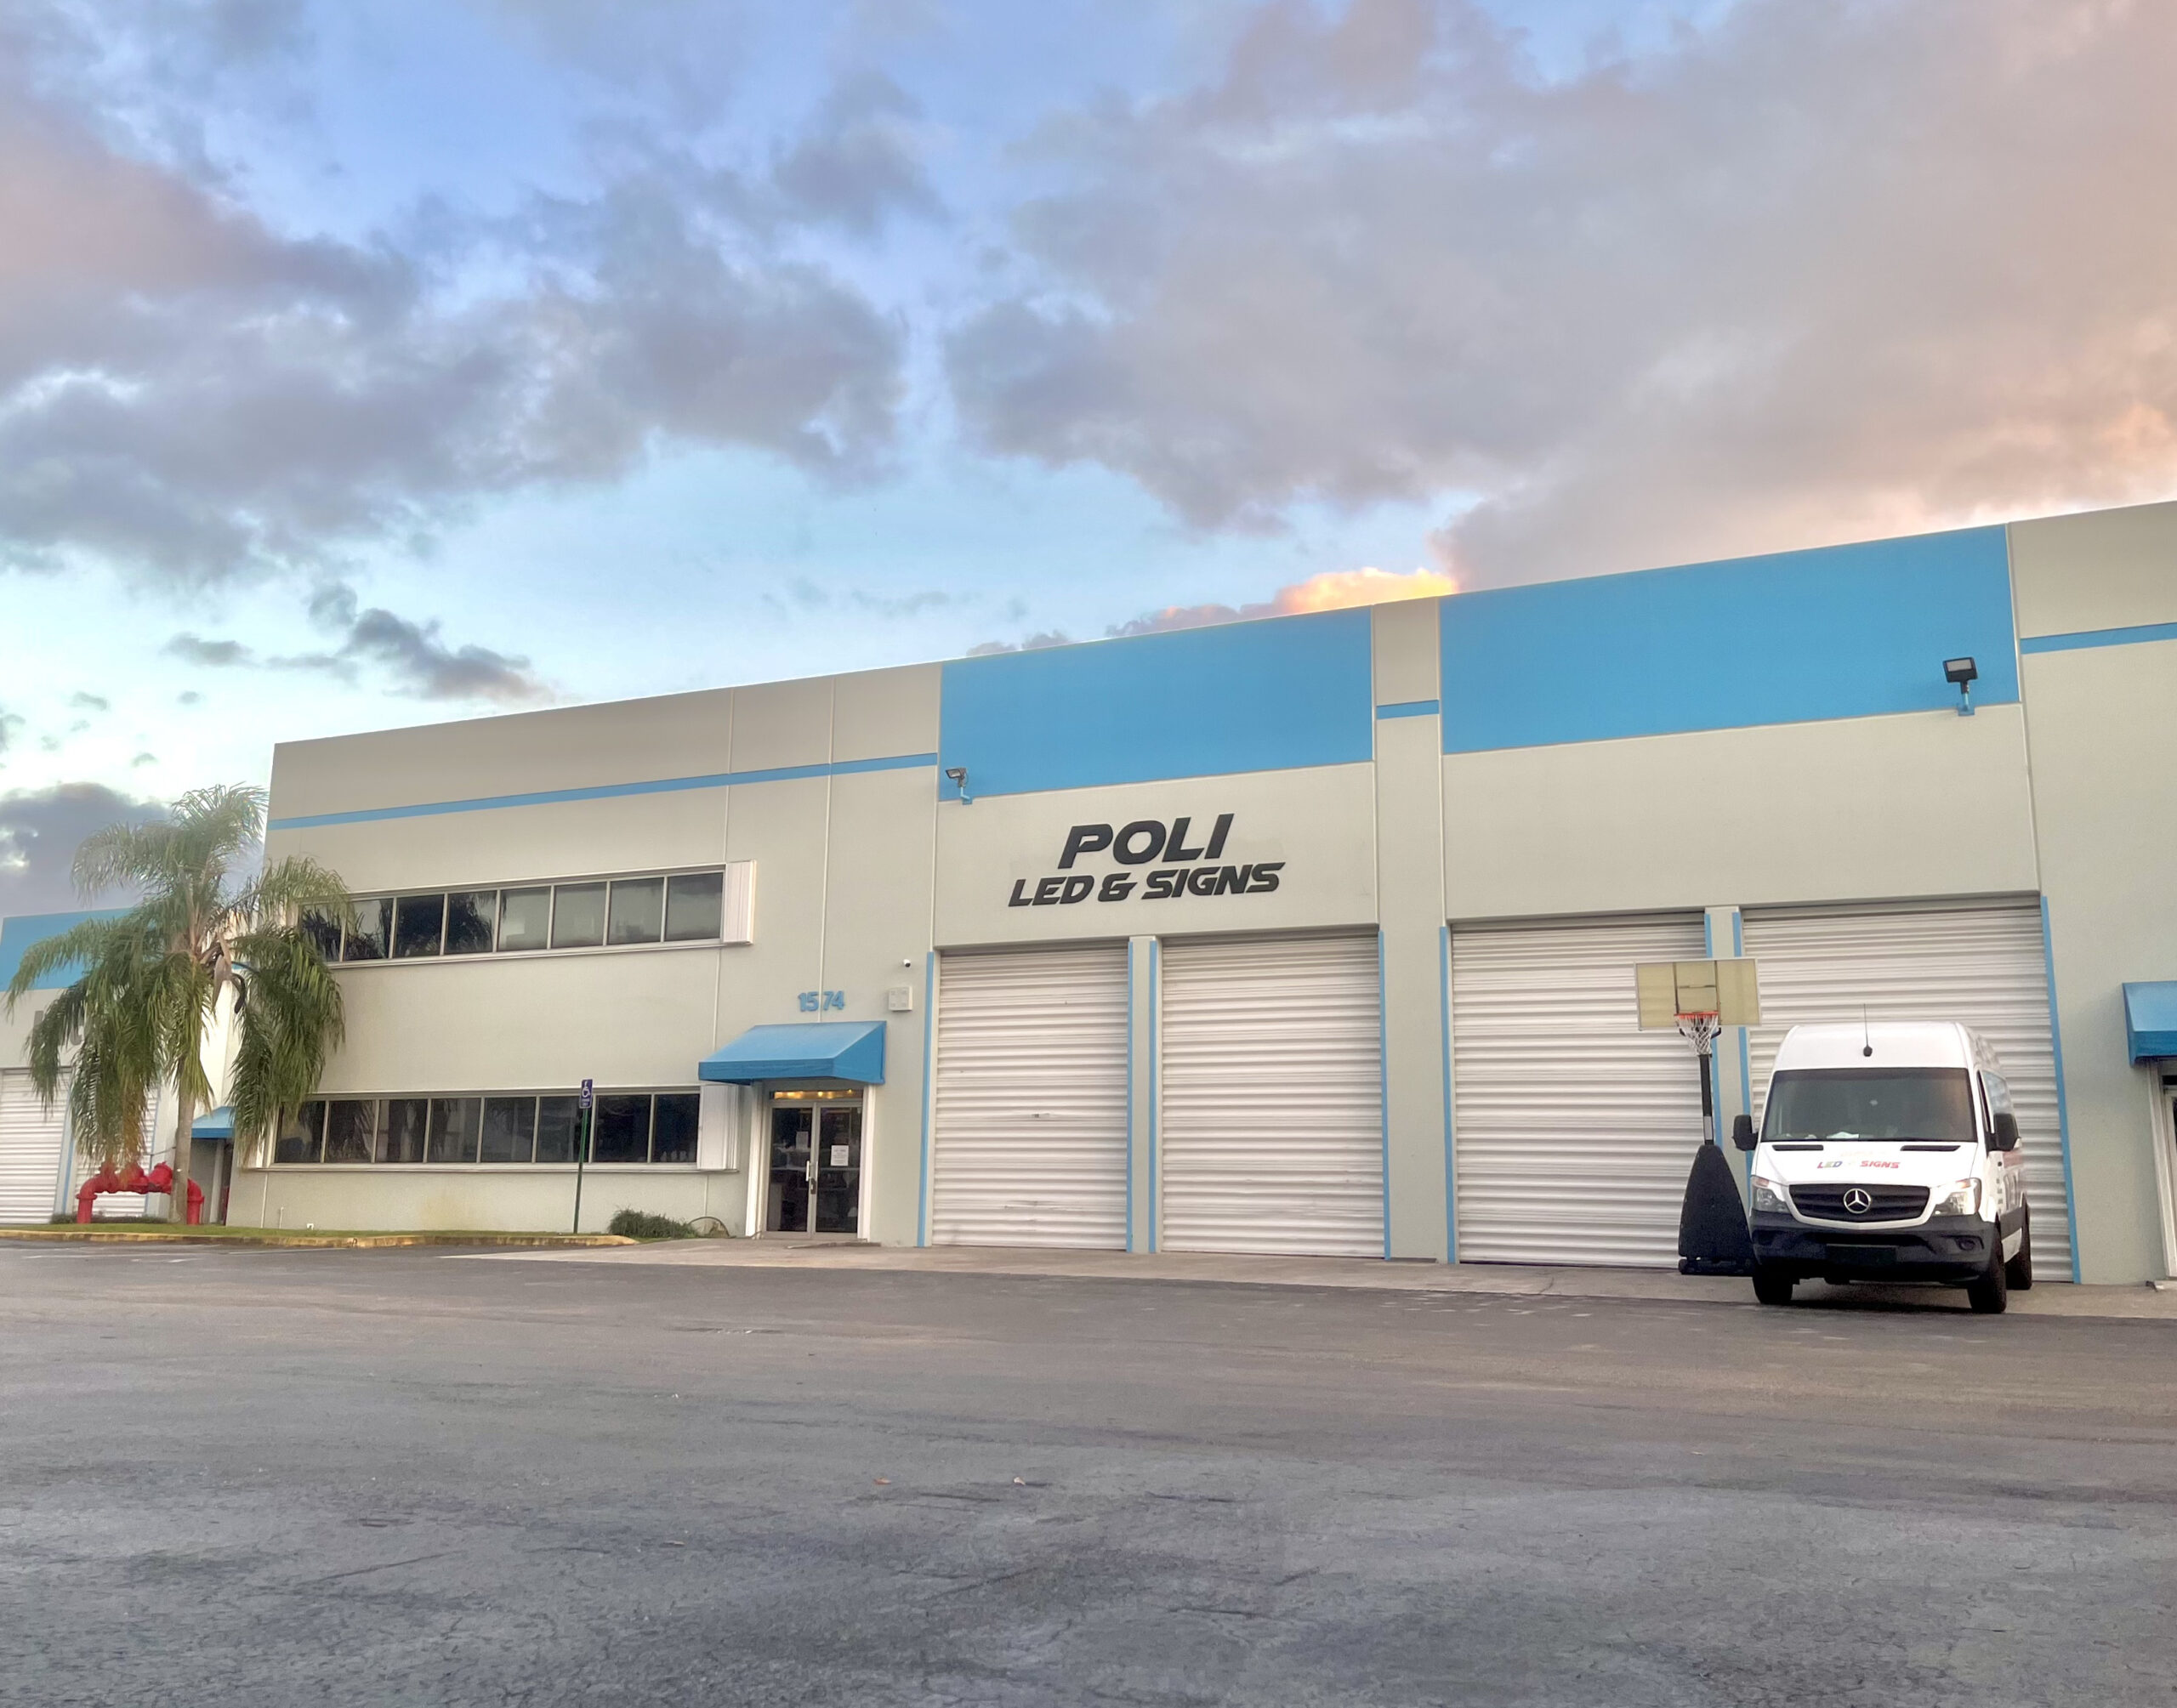 Exterior view of Poli LED & Signs store located at 1574 NW 108th Ave, Miami, FL, 33017. The storefront features a welcoming entrance with prominent LED displays.